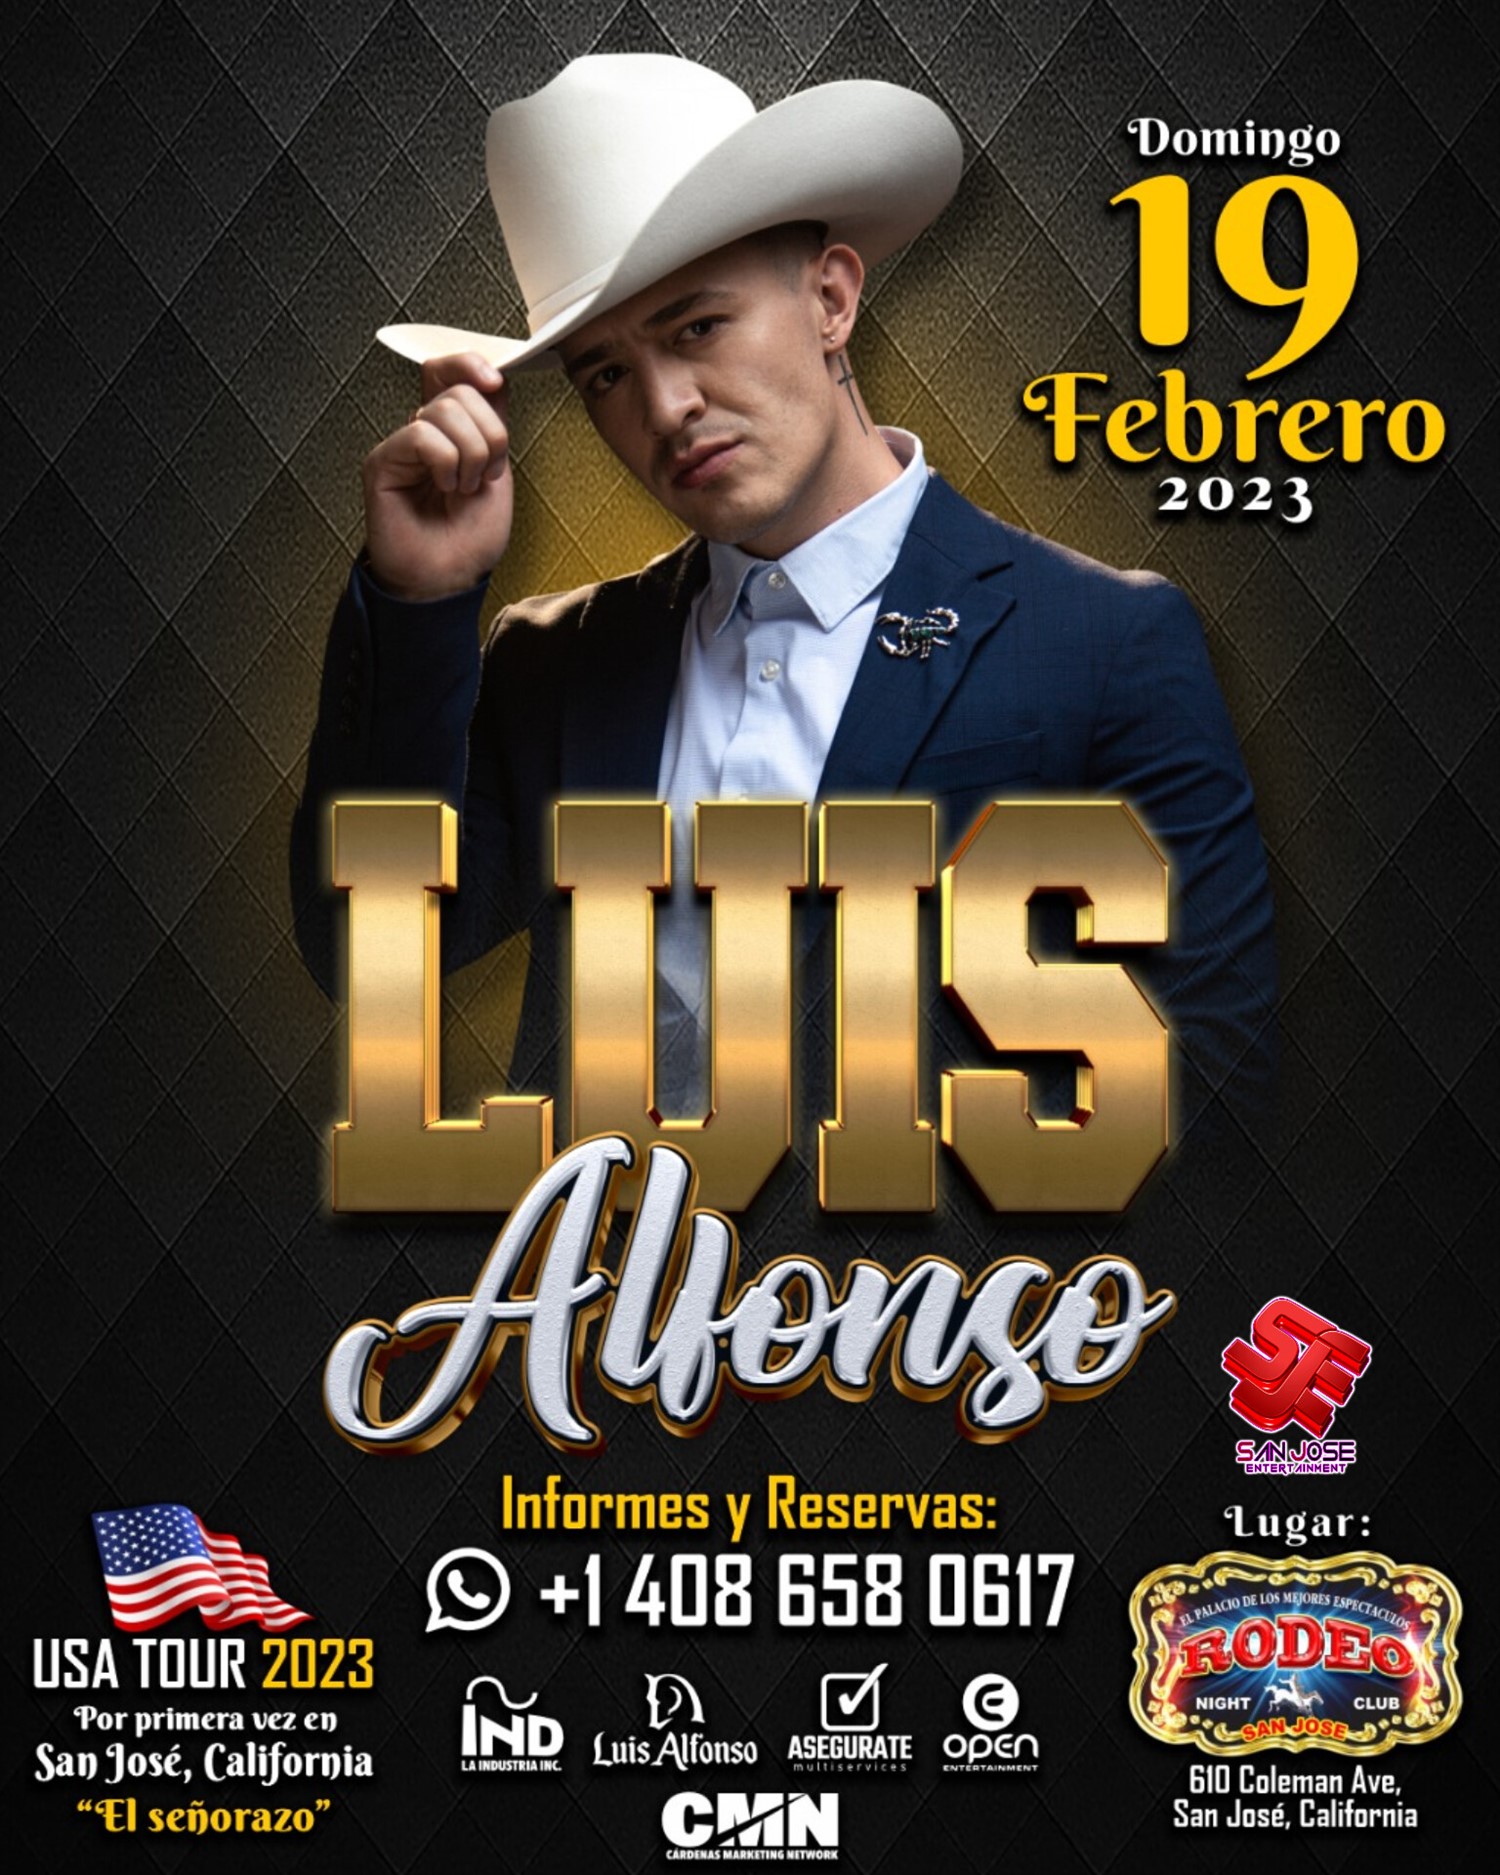 Luis Alfonso  on Feb 19, 18:00@Club Rodeo - Buy tickets and Get information on elrodeorio.com sanjoseentertainment